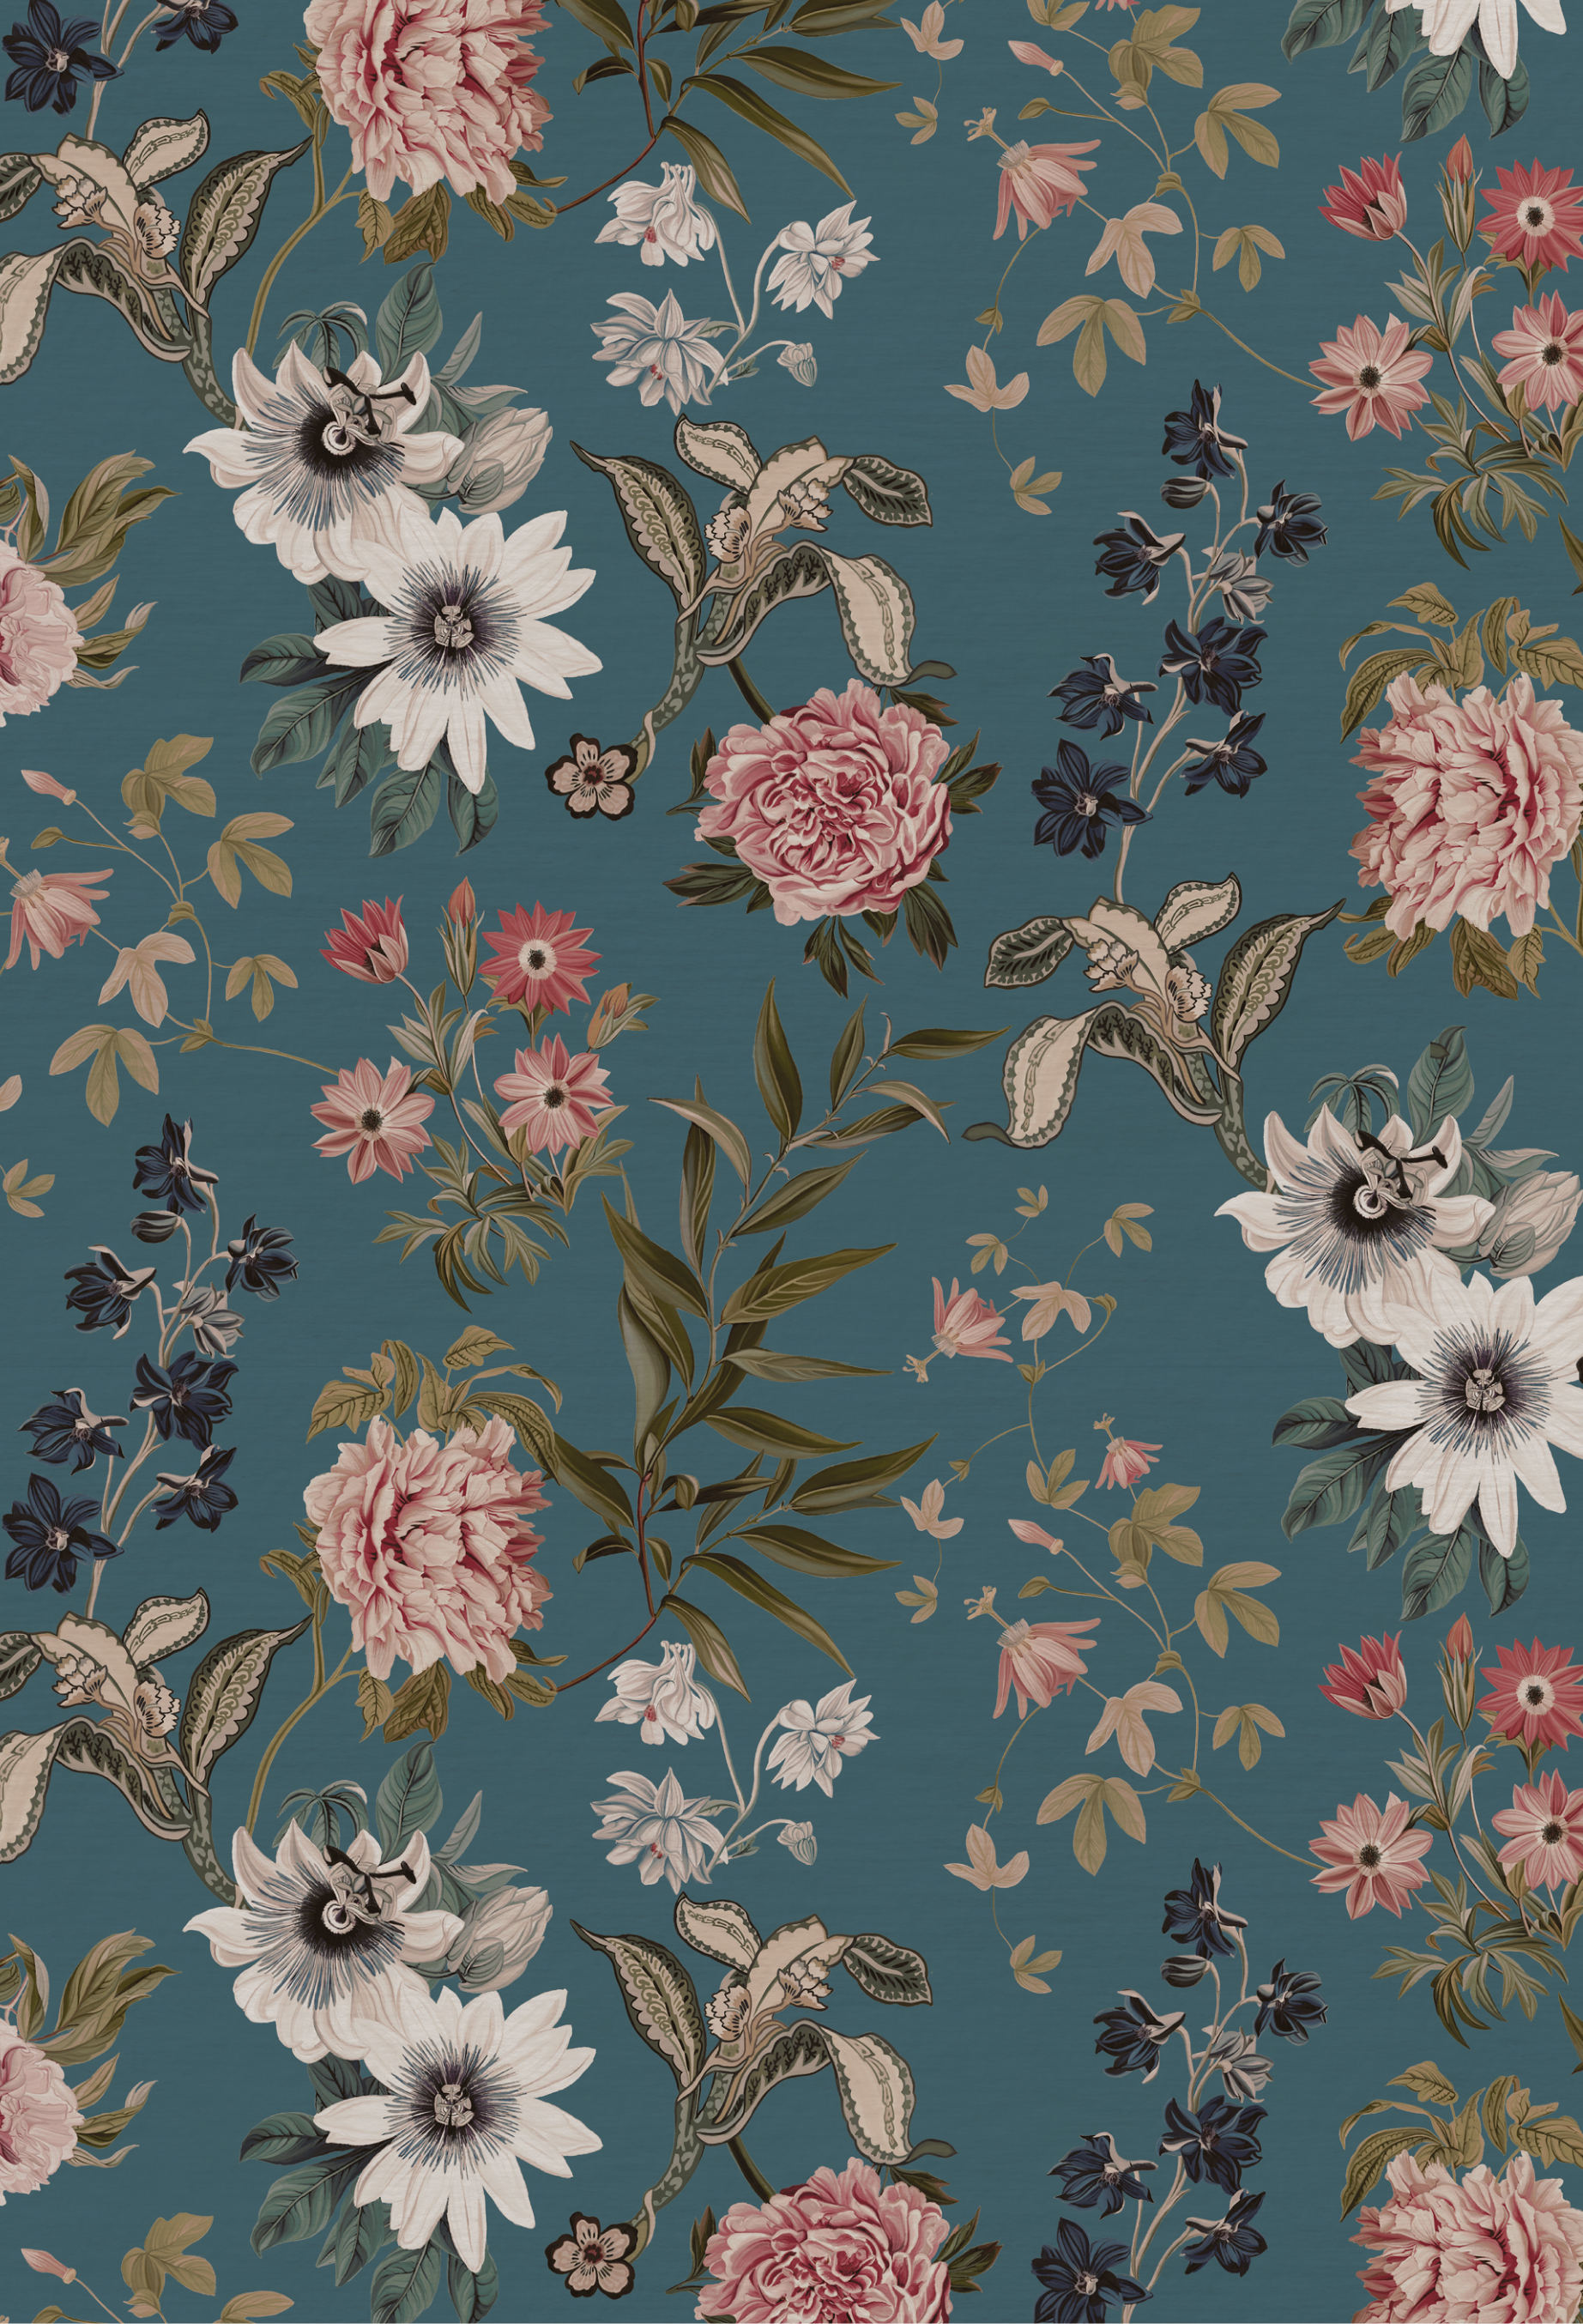 A pattern of painted antique flowers on a cerulean blue wallpaper from the Beechcraft Garden collection by Deus ex Gardenia.